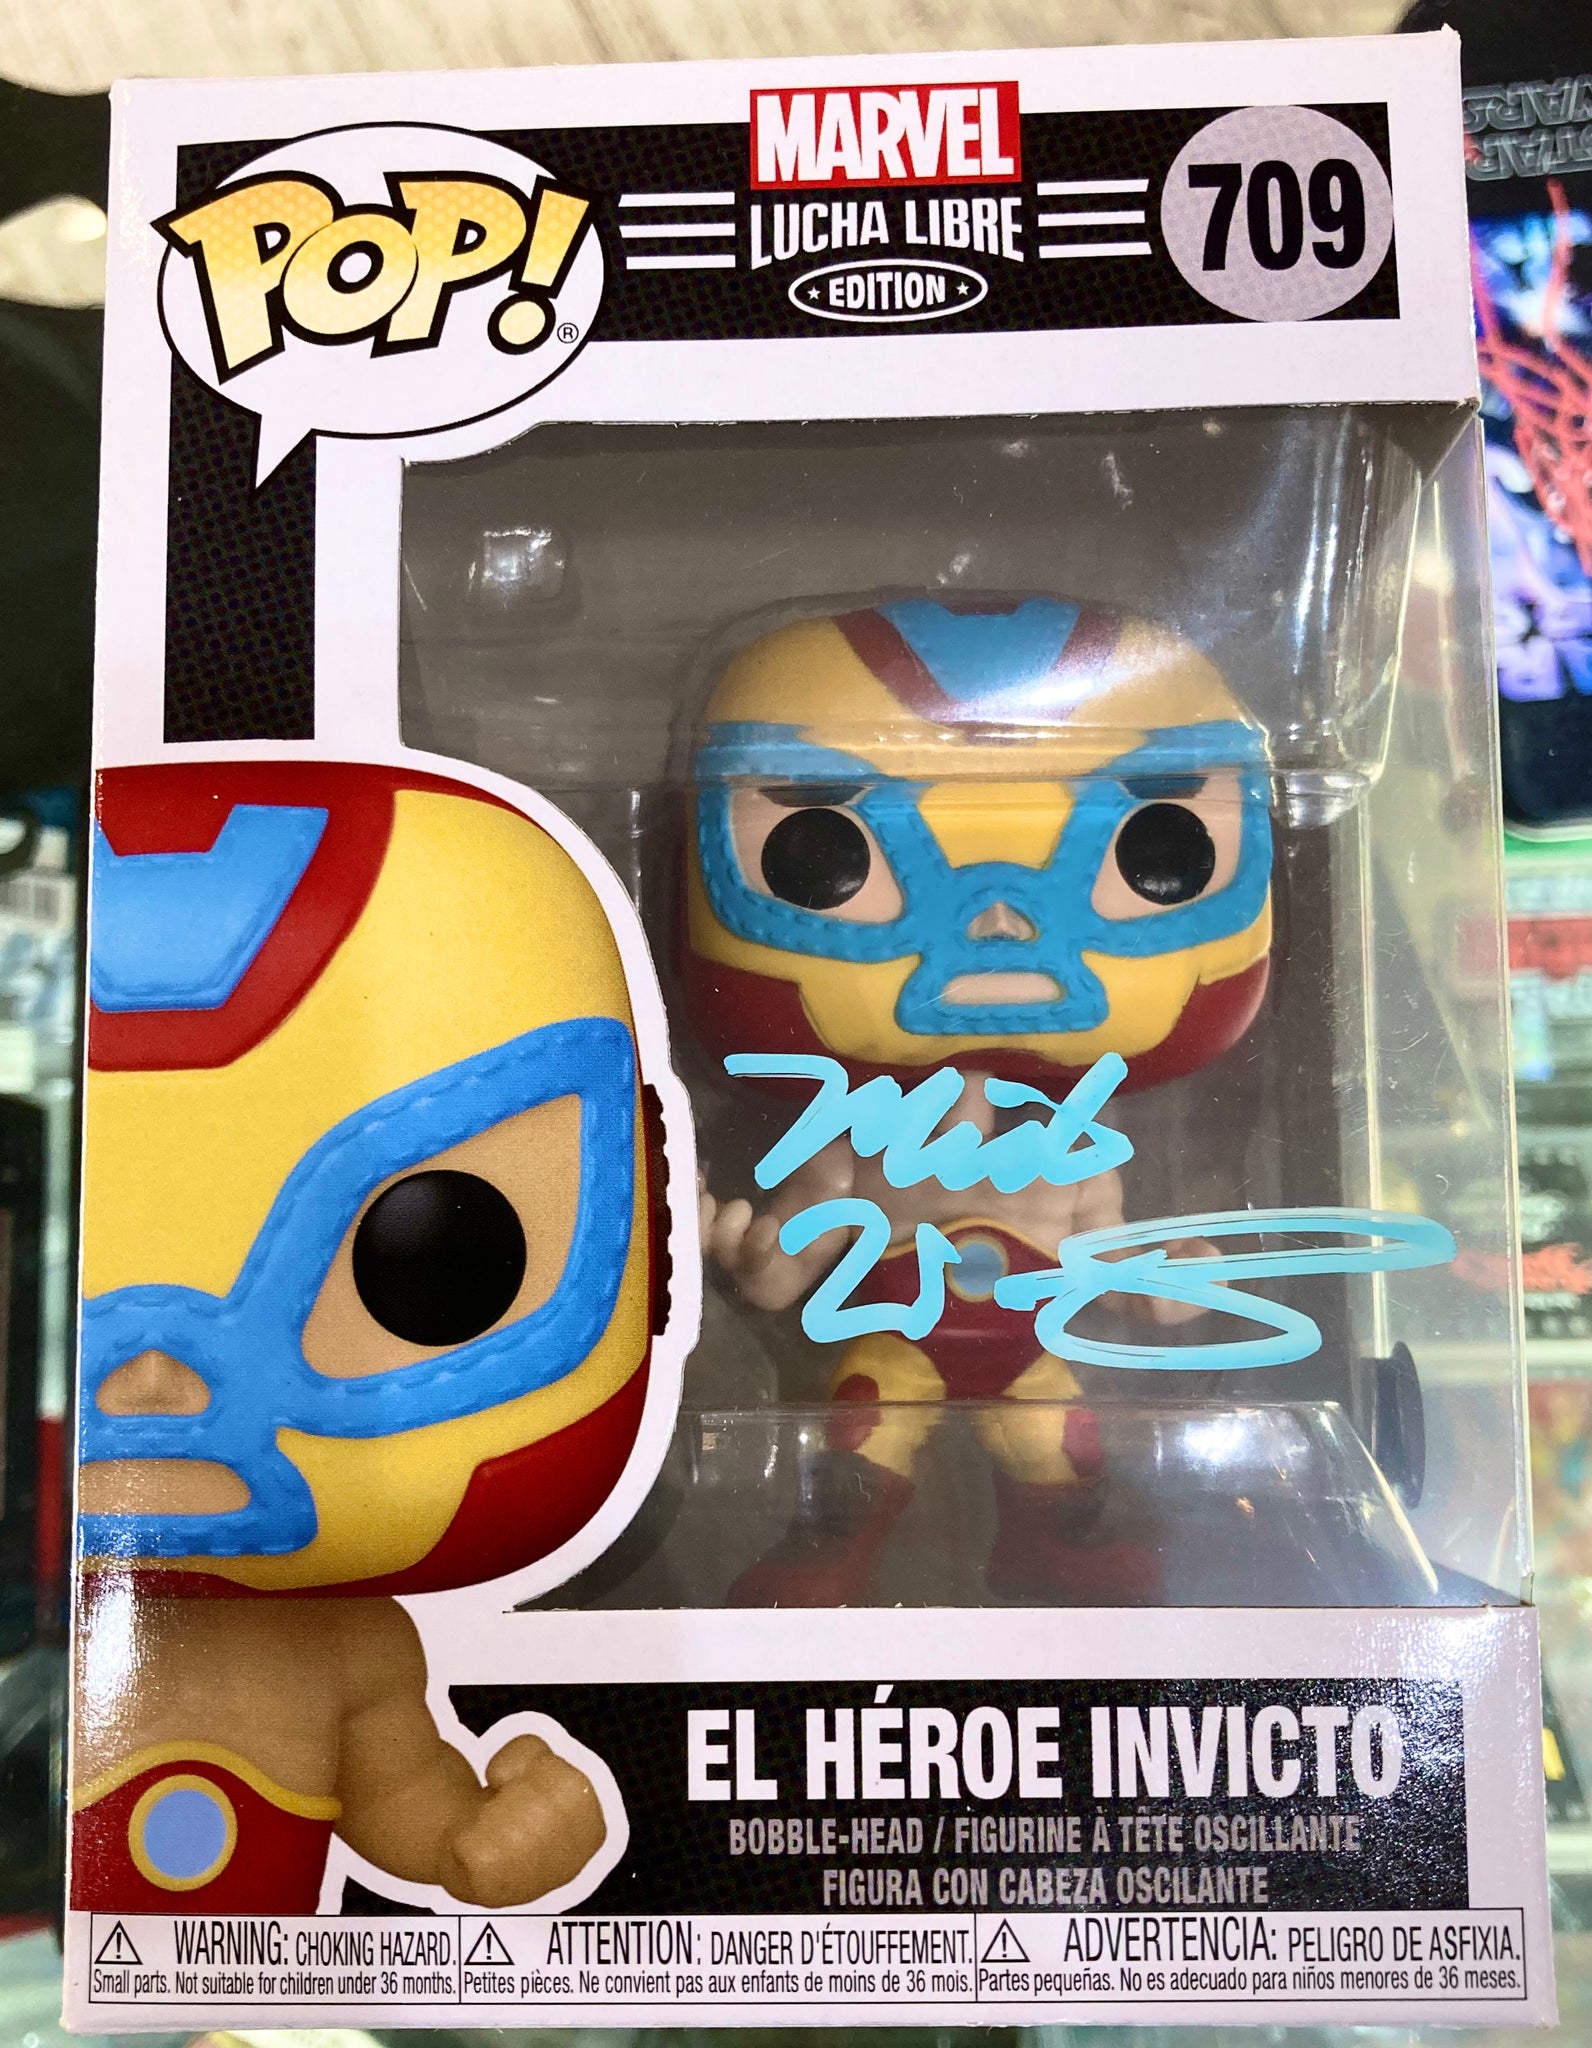 Marvel Lucha Libre Edition El Heroe Invicto Mick Wingert Autographed 709 Funko POP! with Beckett Authenticity